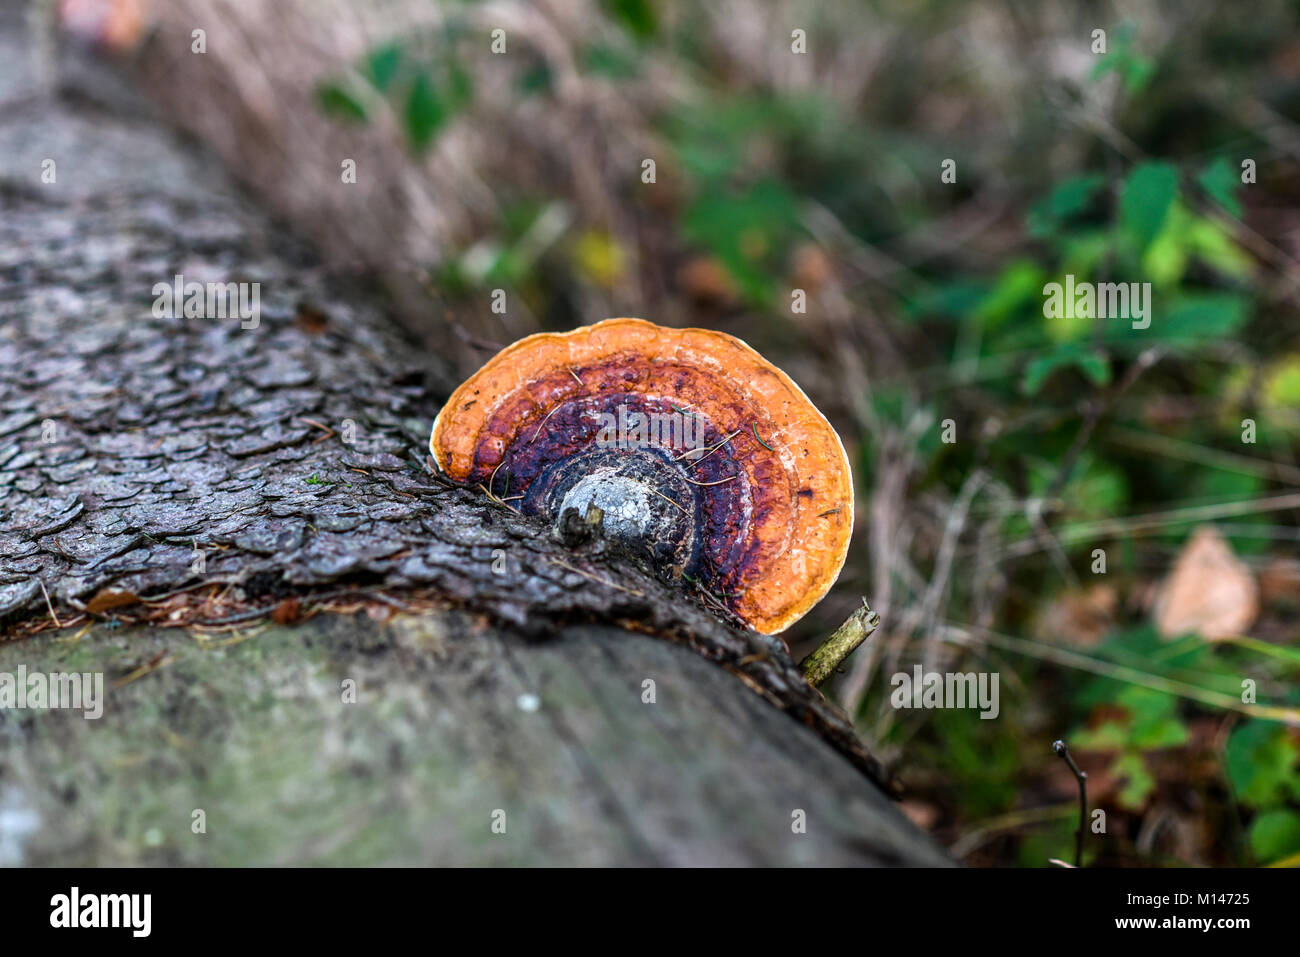 Pinicola growing on a tree in the forest, autumn season. Stock Photo